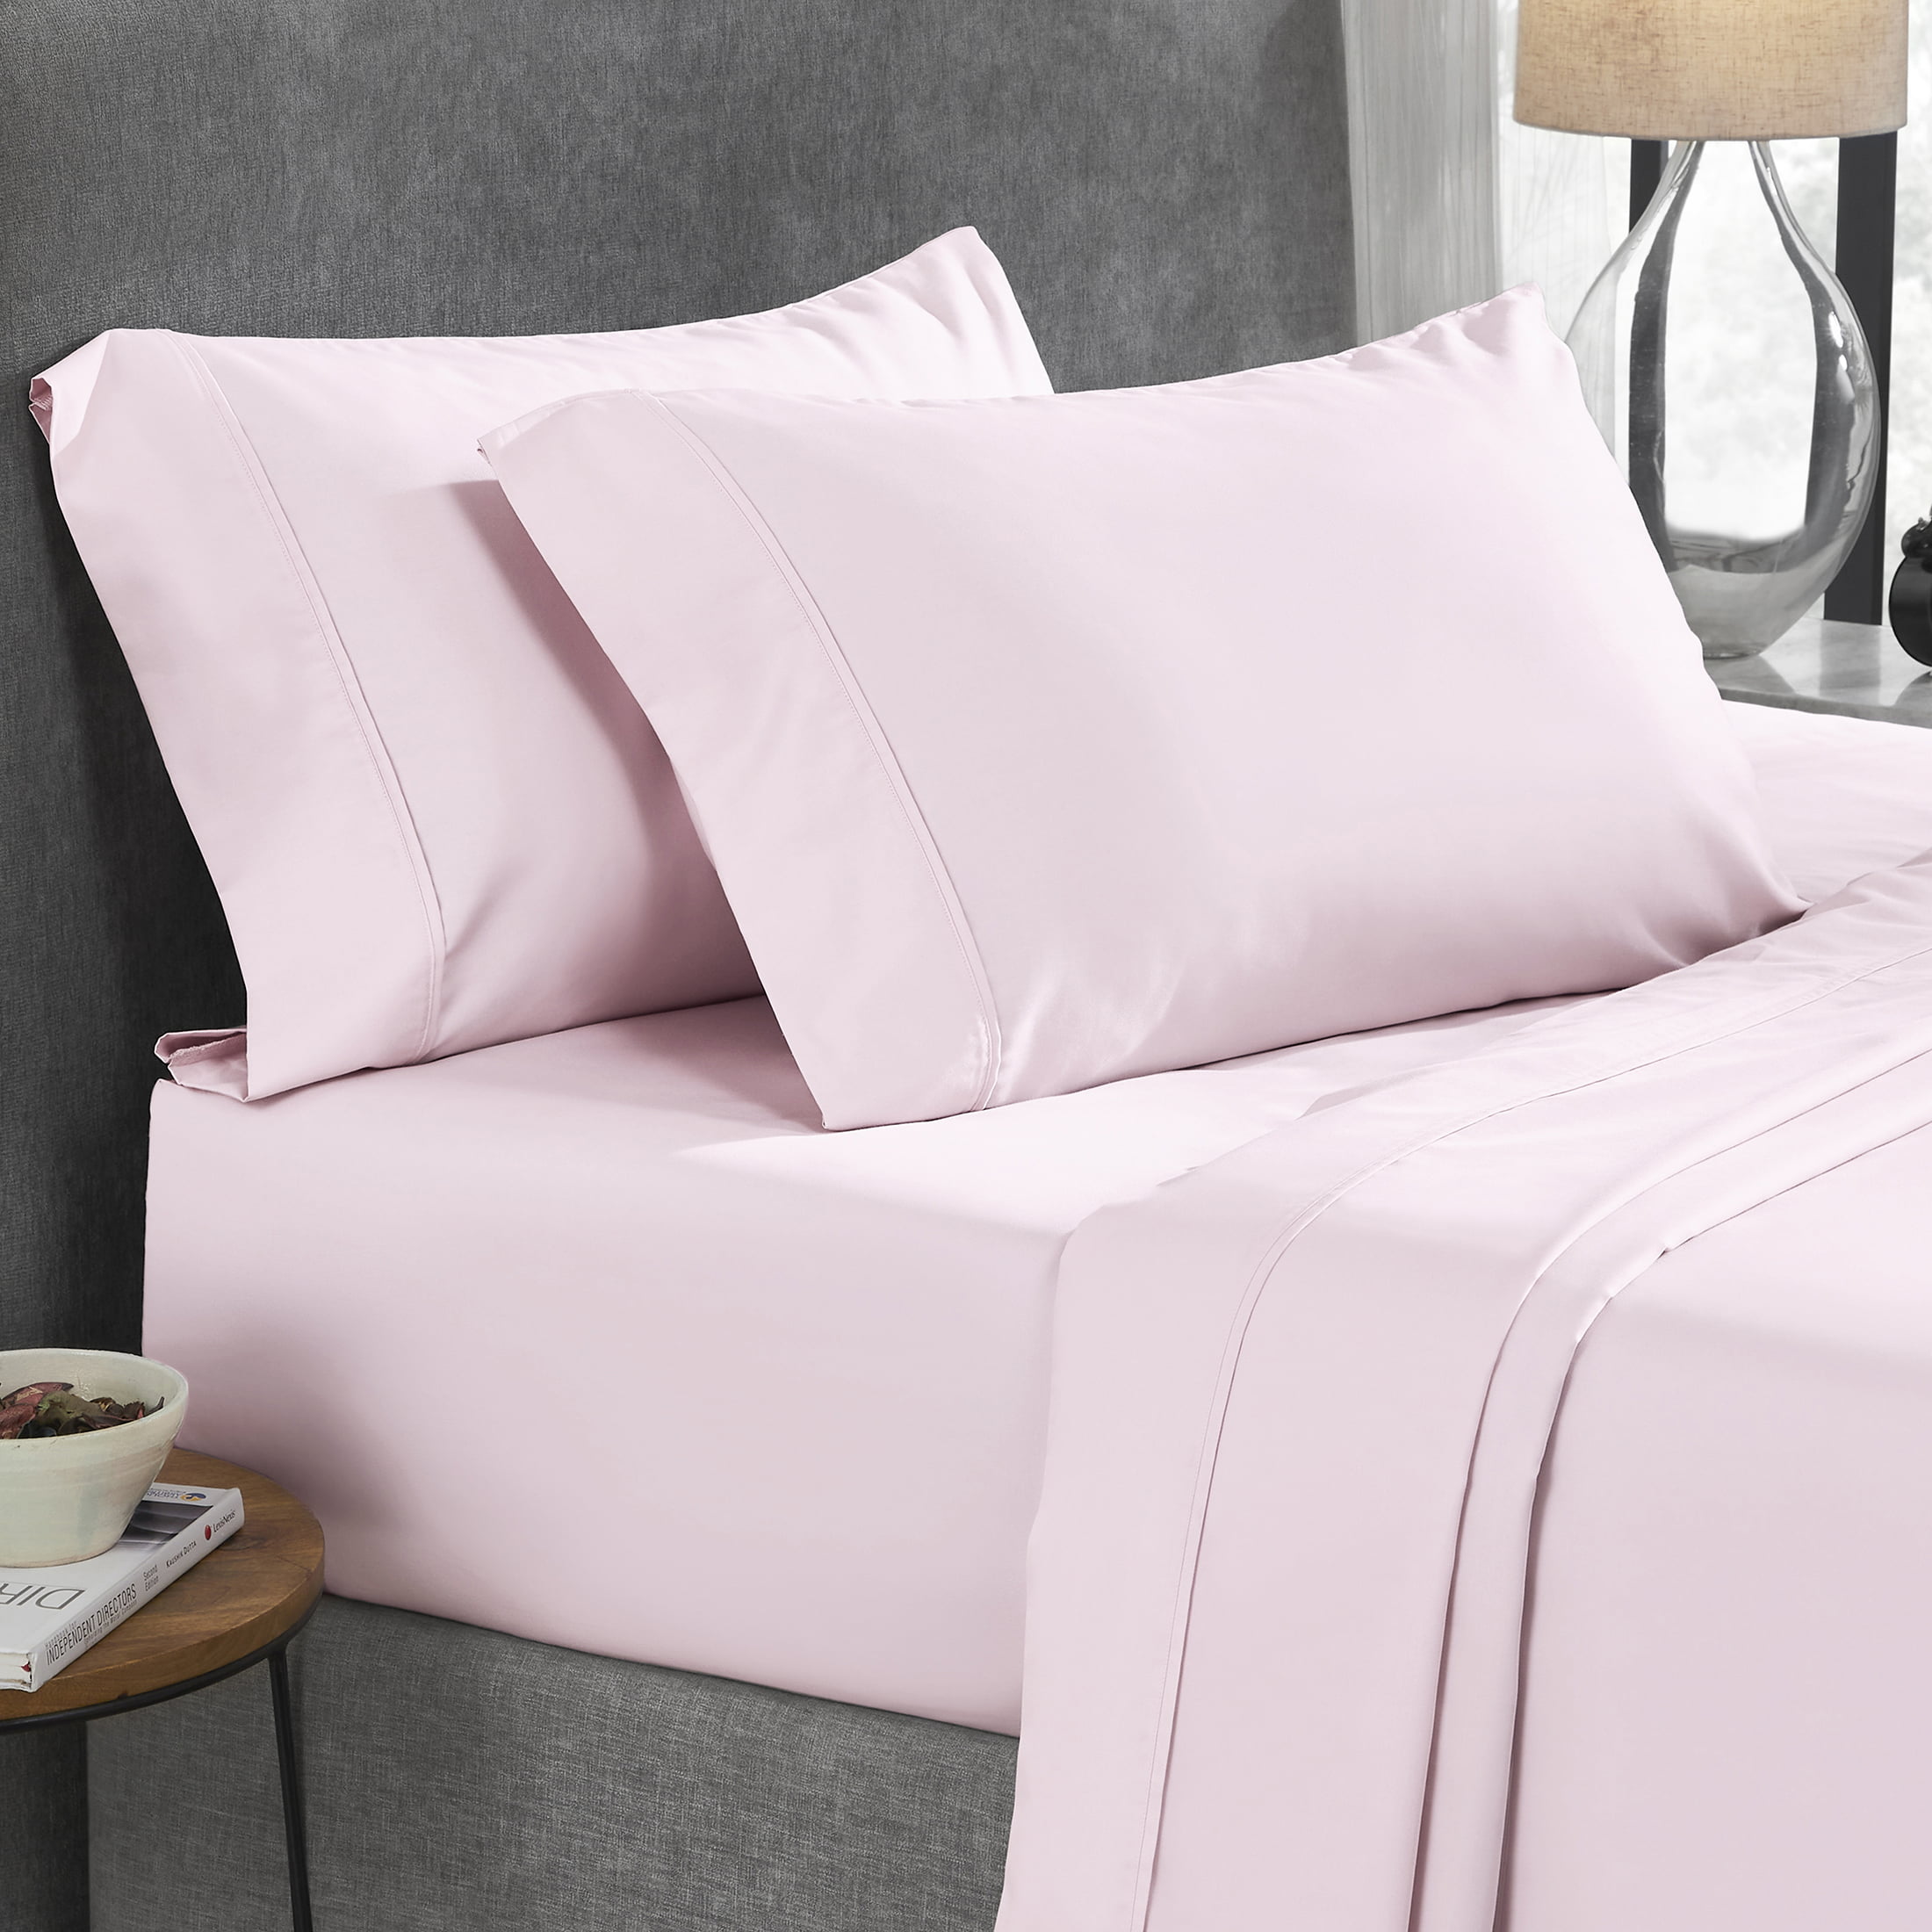 Details about   King Sheet Set 400 Thread Count Wrinkle & Shrinking Resistant 18"Deep 100%Cotton 